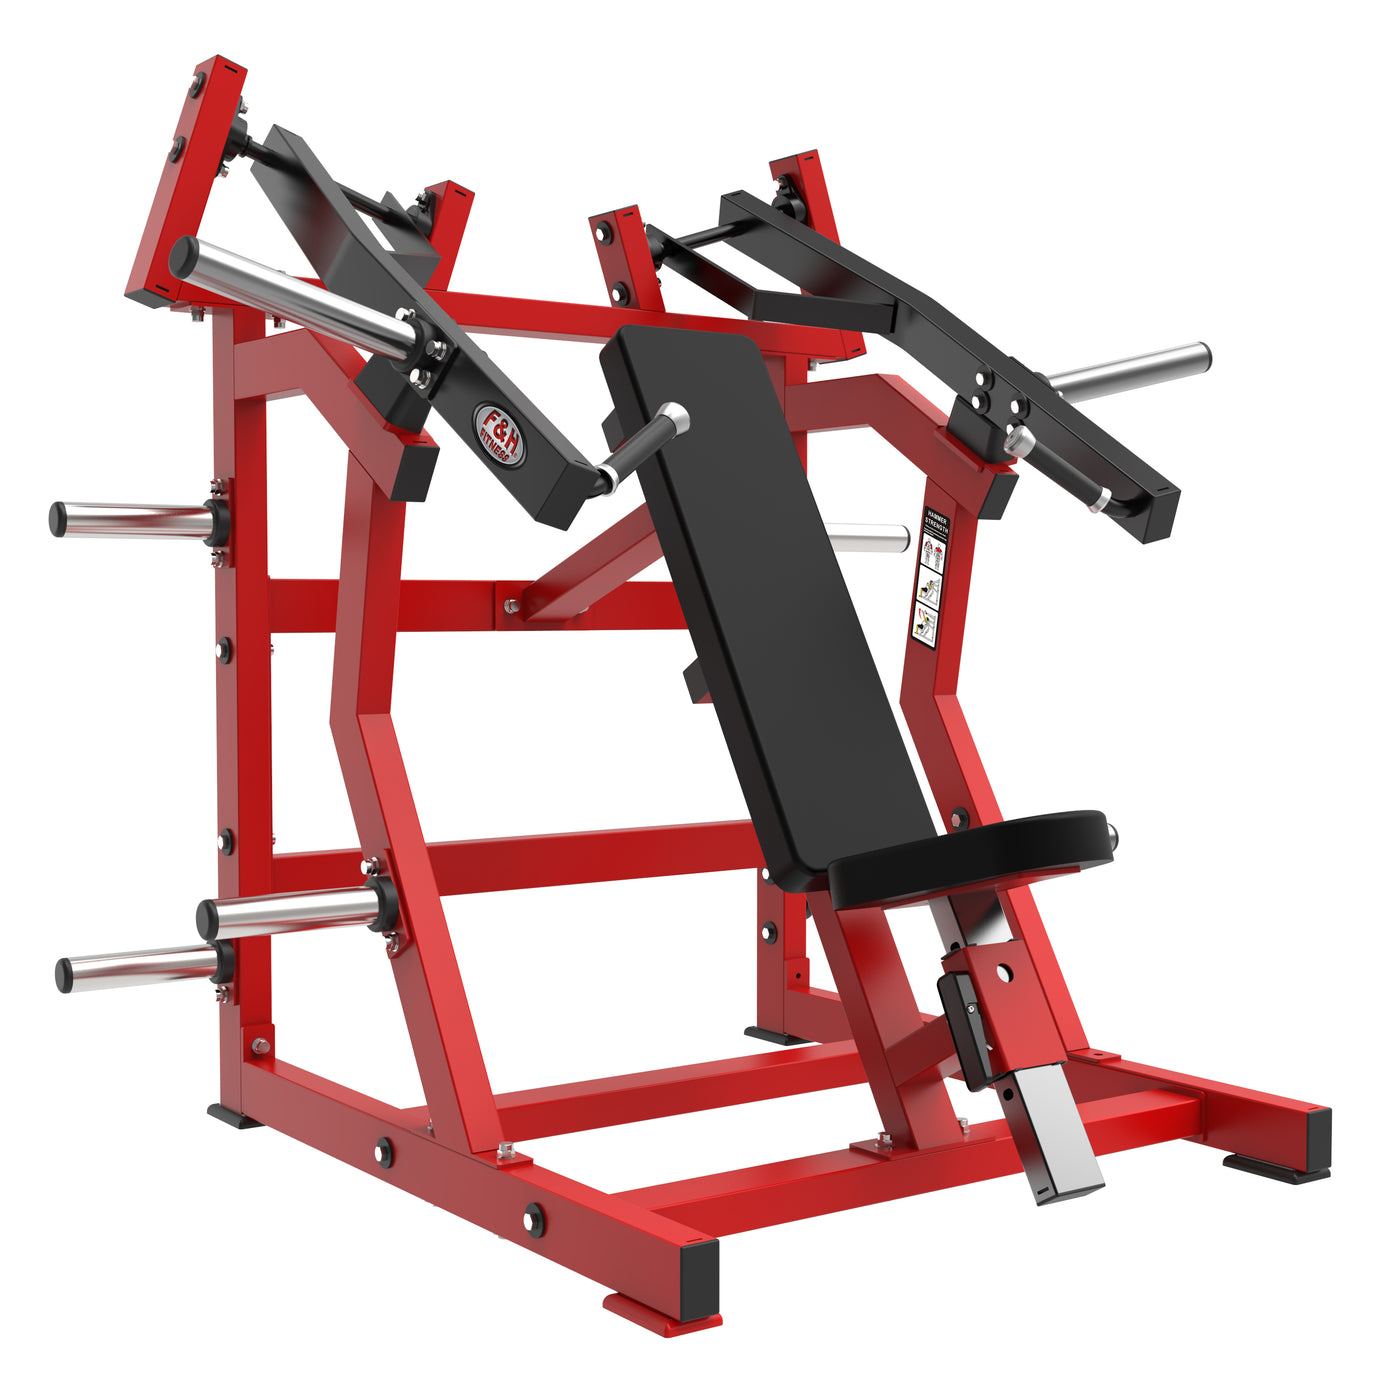 IF 15 SEATED INCLINE CHEST PRESS